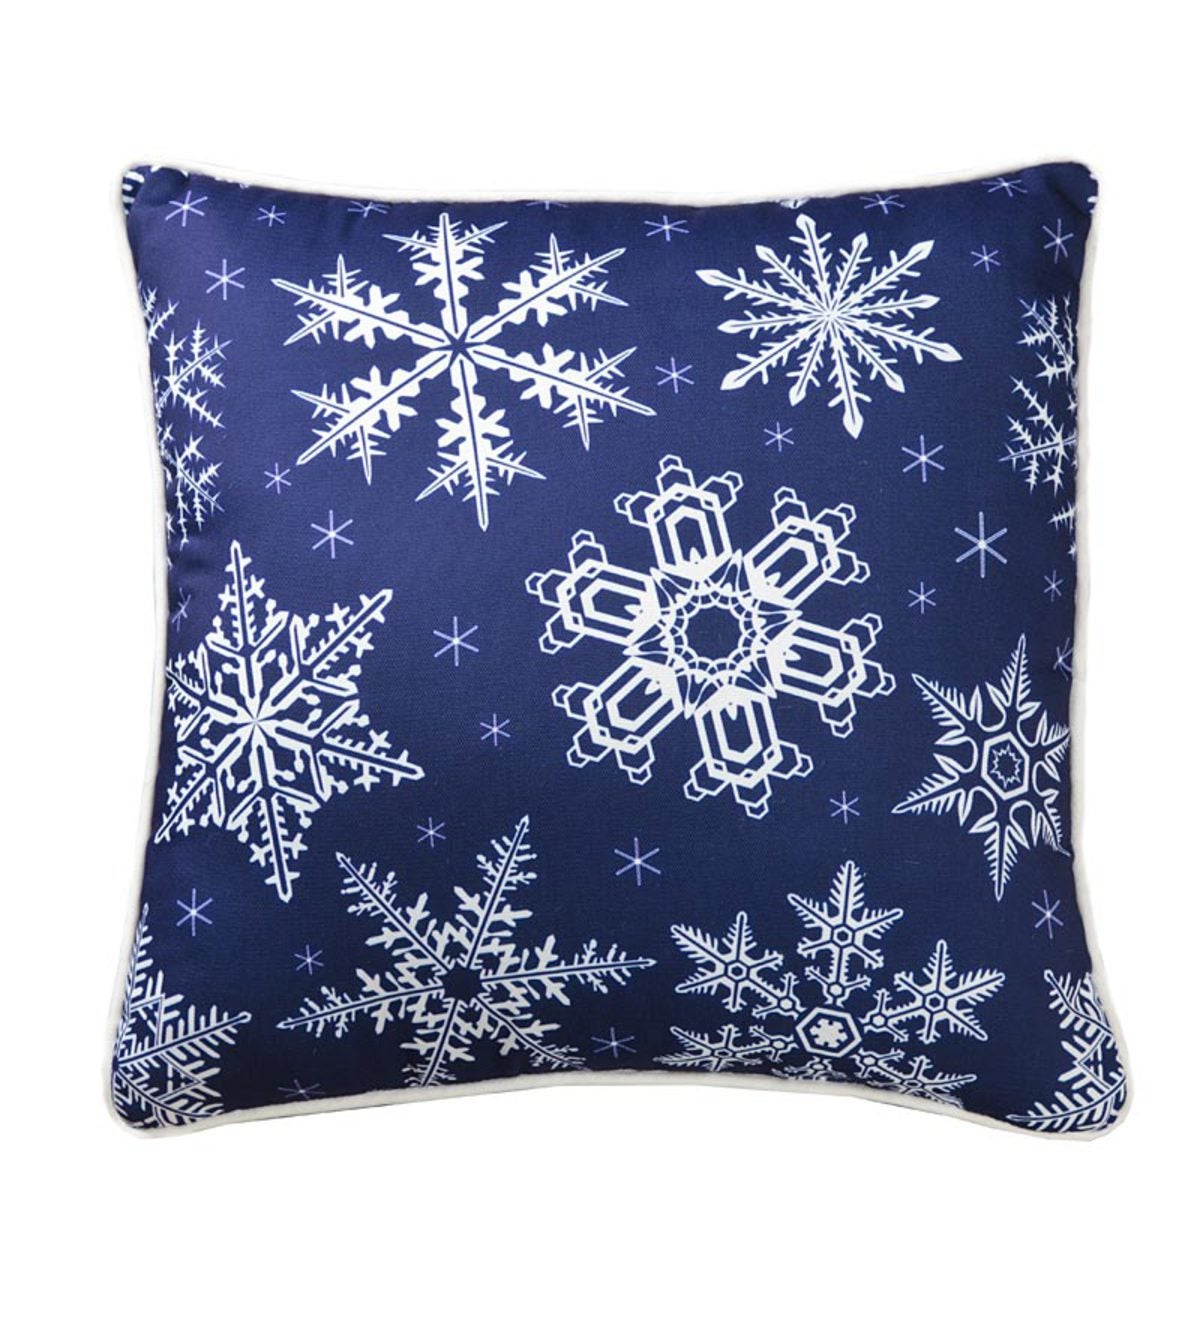 18”sq. Lava Falling Snowflake Printed Accent Pillow